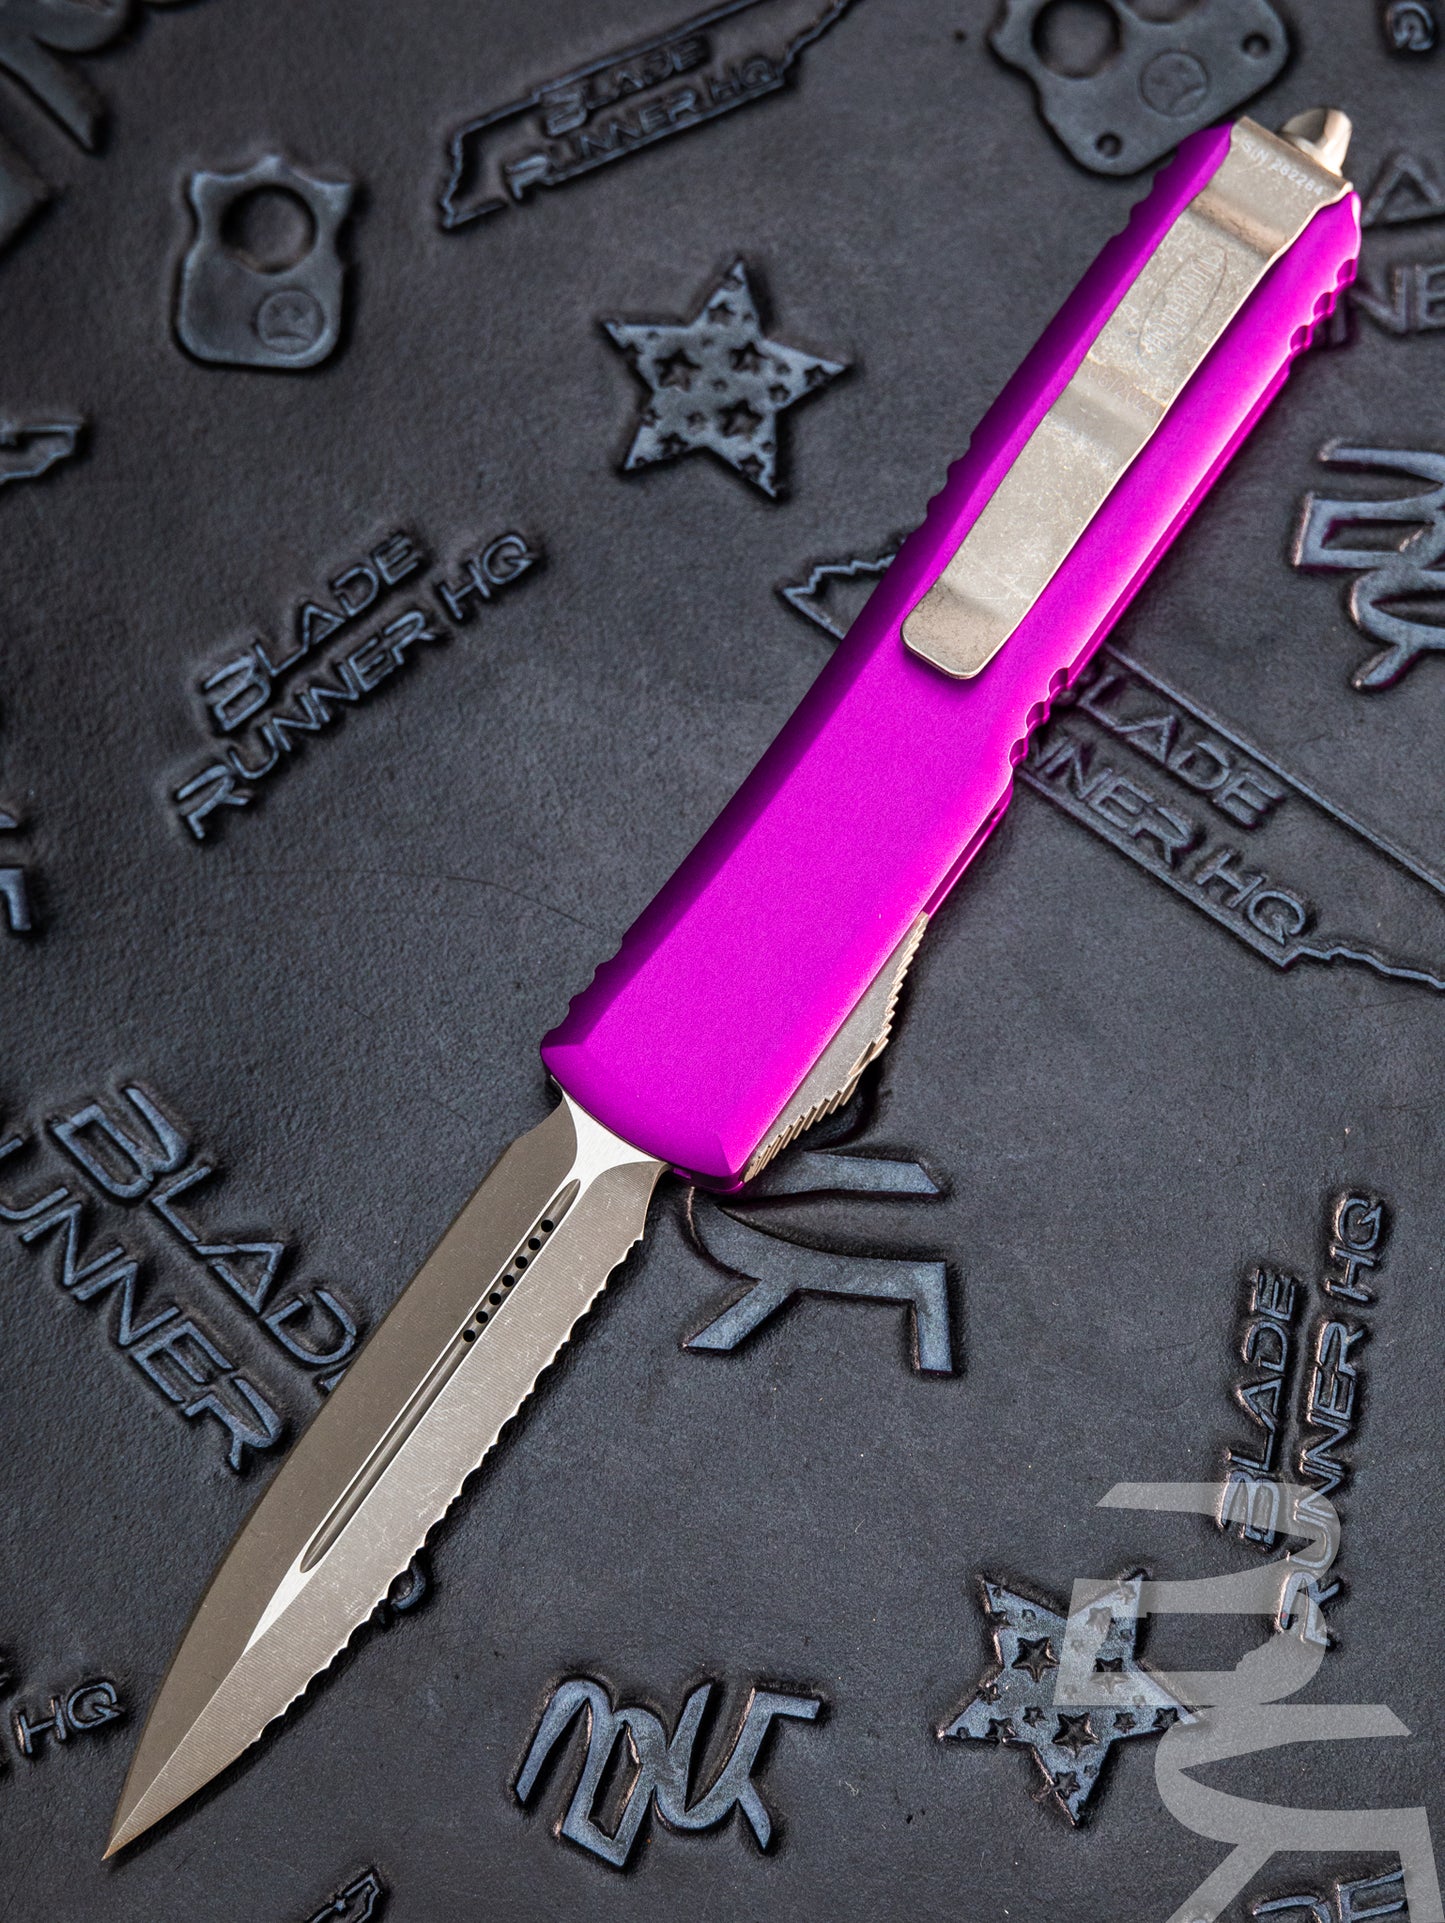 Microtech Ultratech D/E OTF Automatic Knife Violet (3.4" Apocalyptic Serrated)